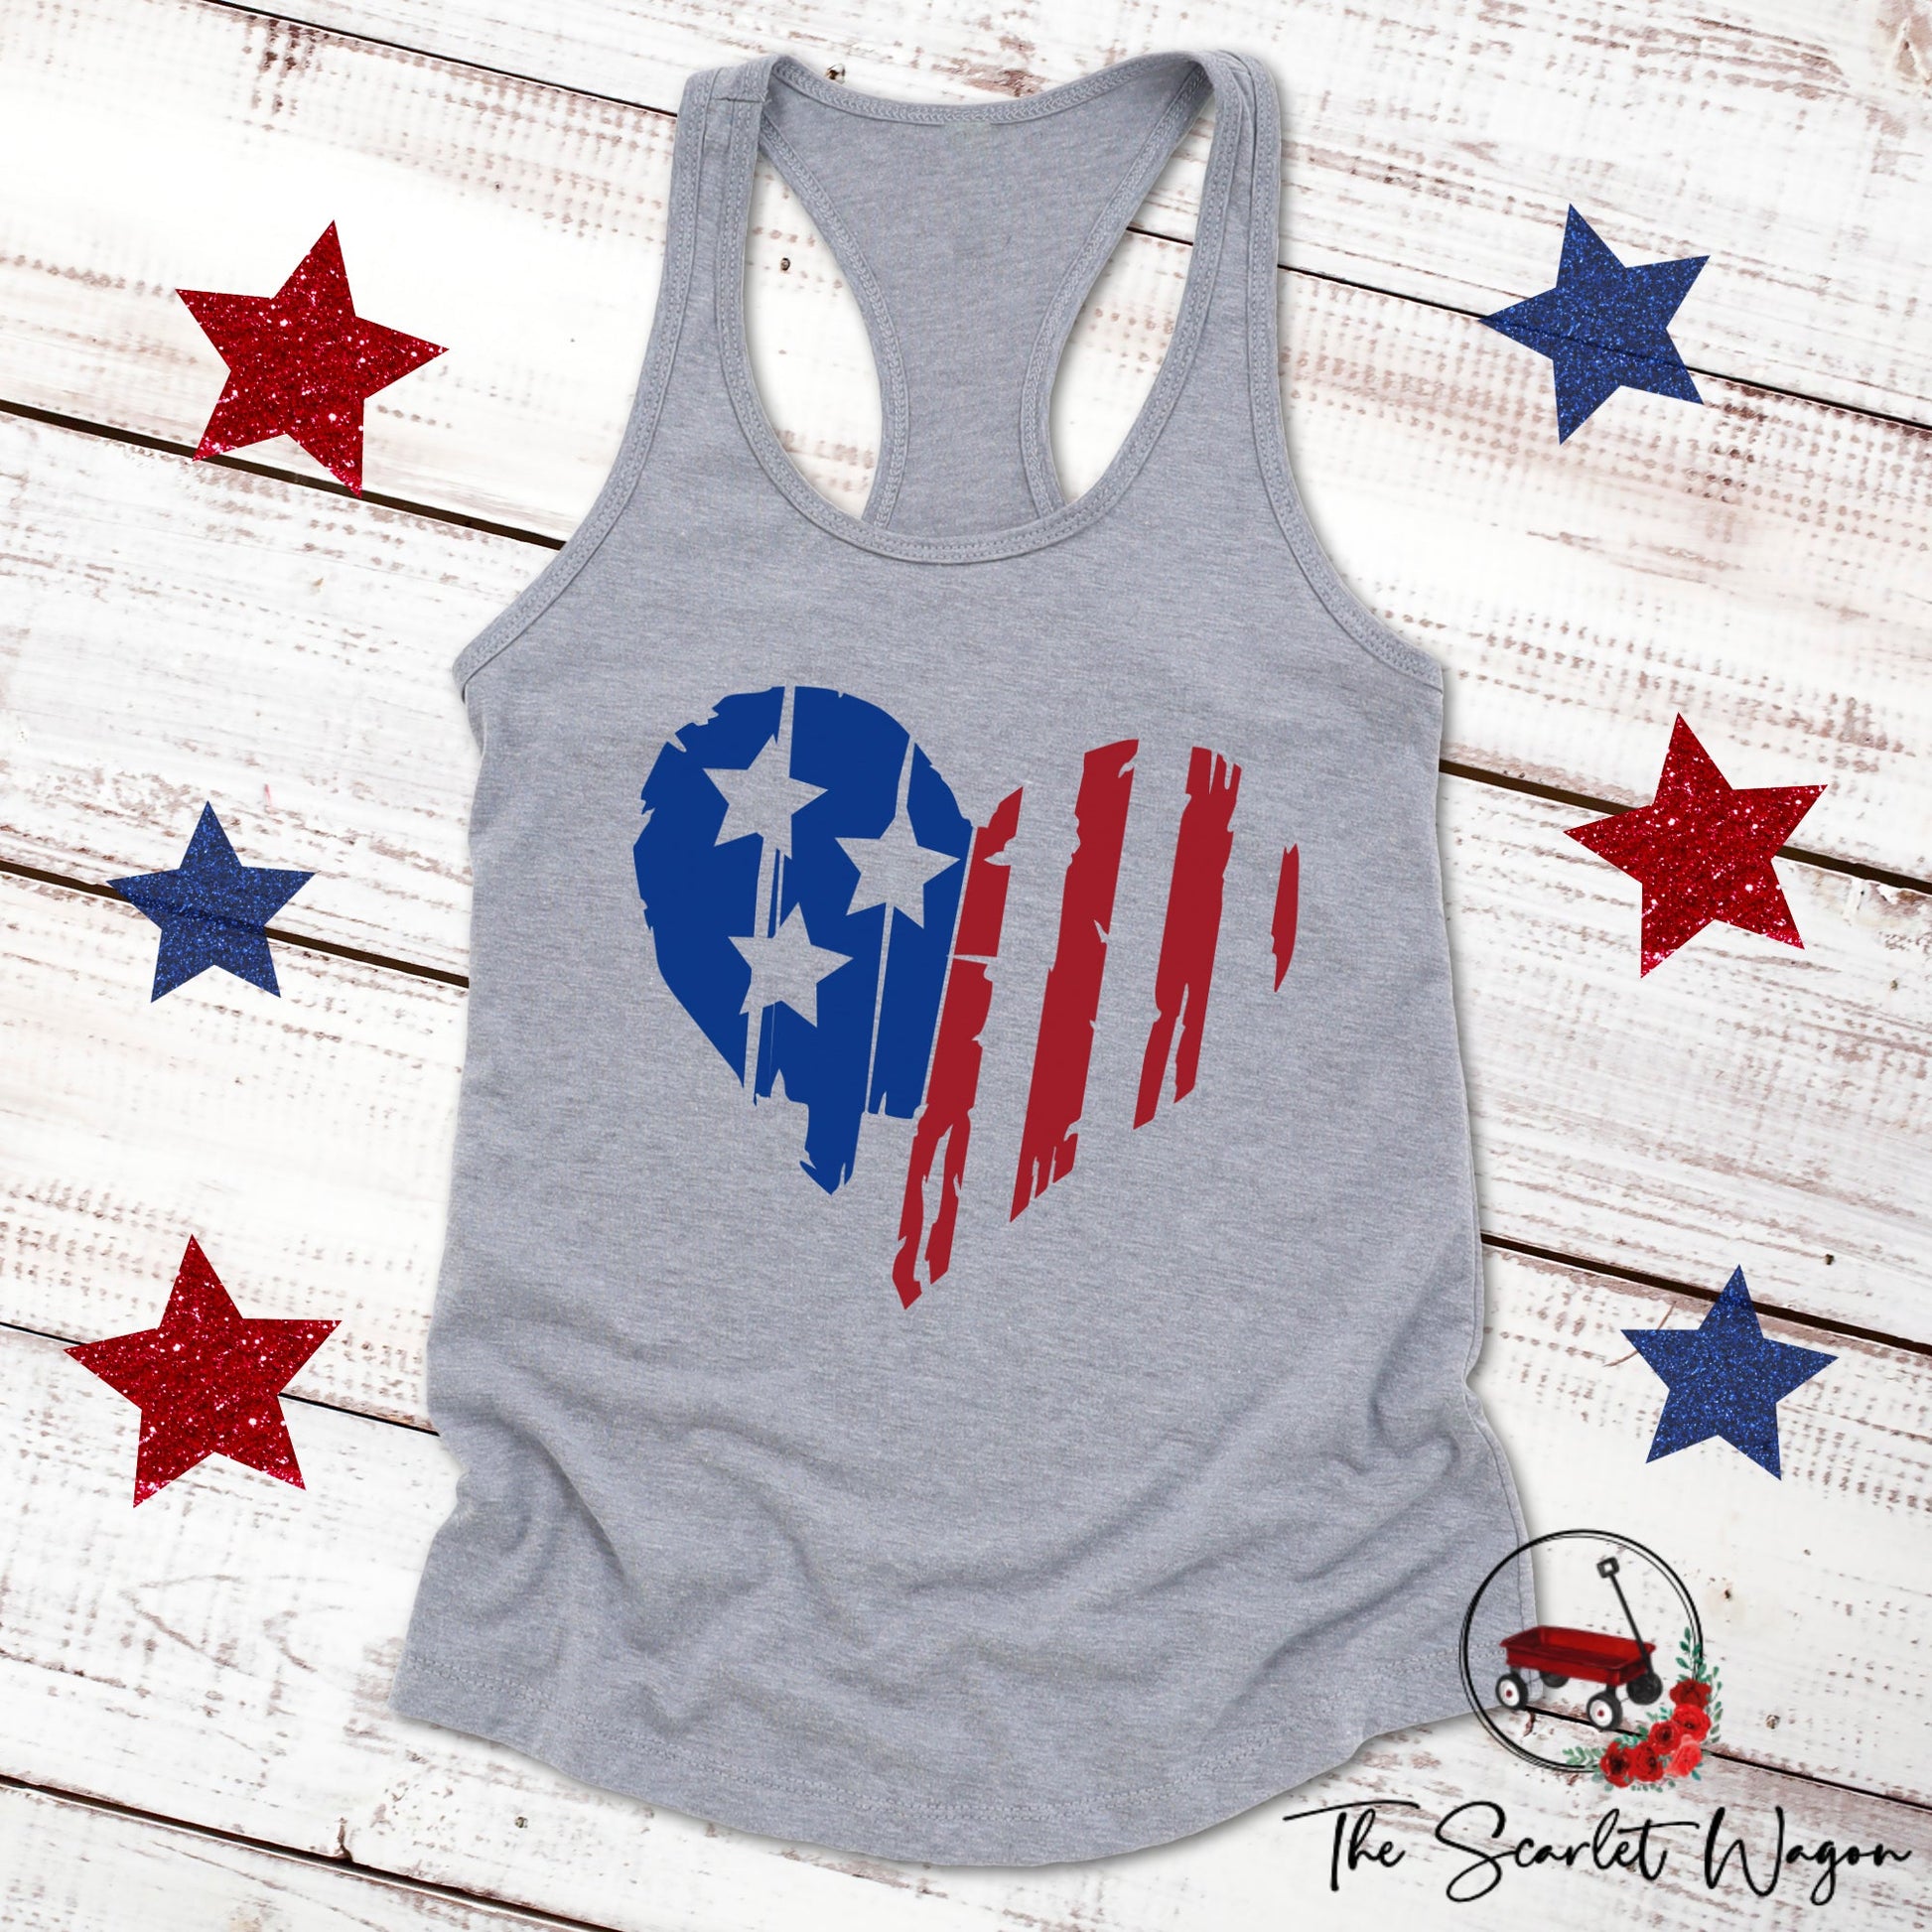 Distressed Heart-Shaped Flag Women's Racerback Tank Patriotic Shirt The Scarlet Wagon Boutique Heather Gray Small 